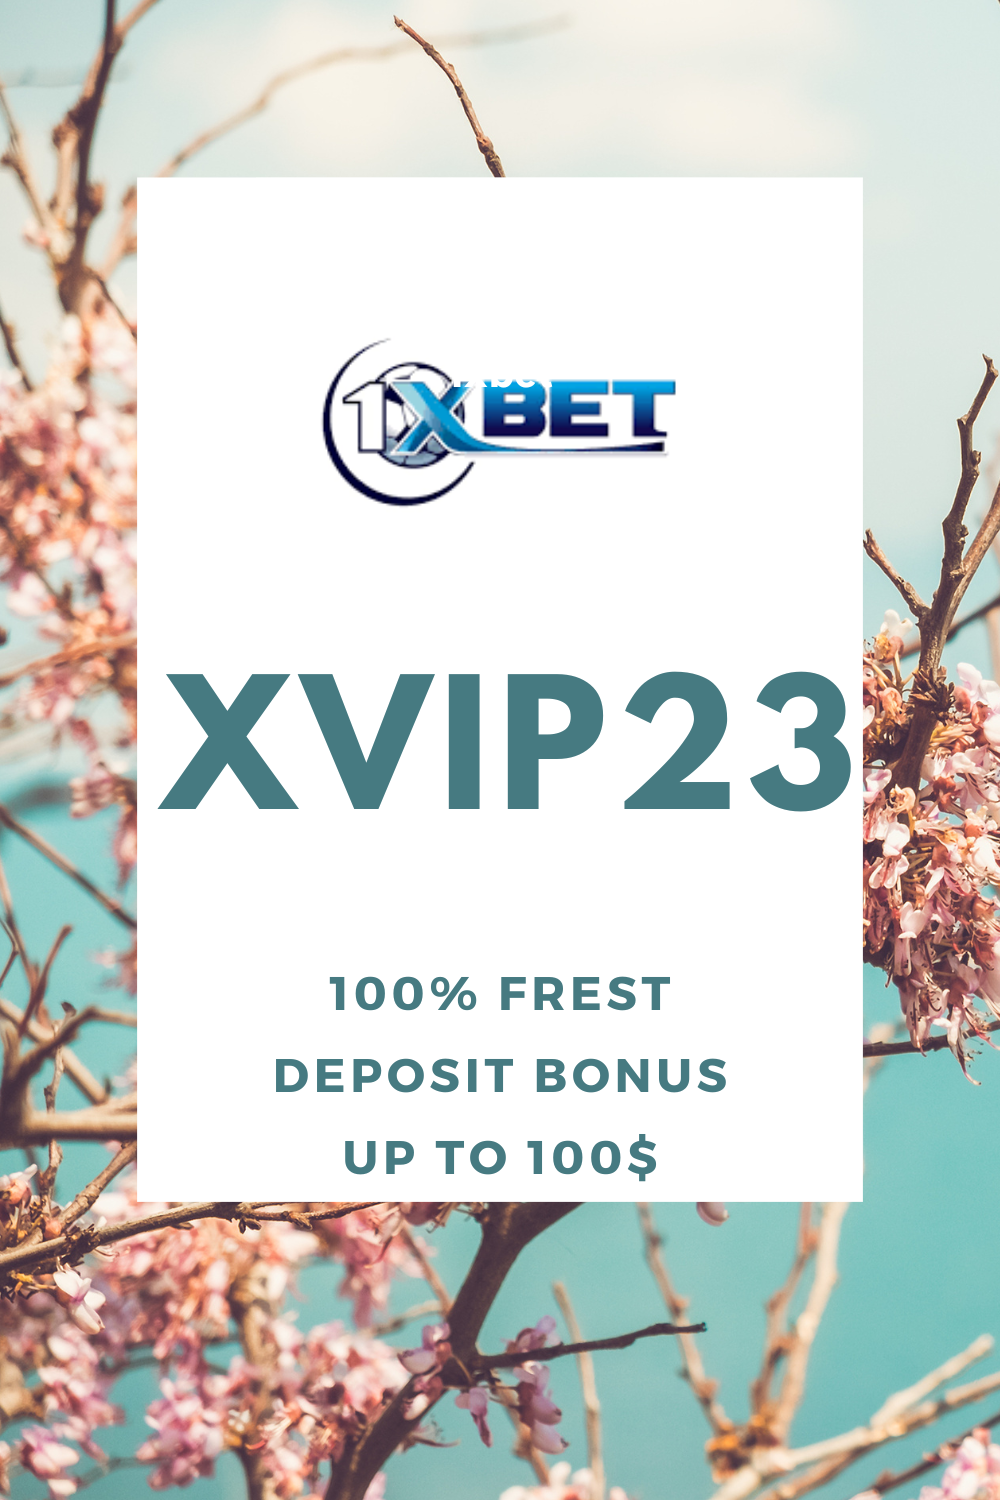 1xbet promo code.png